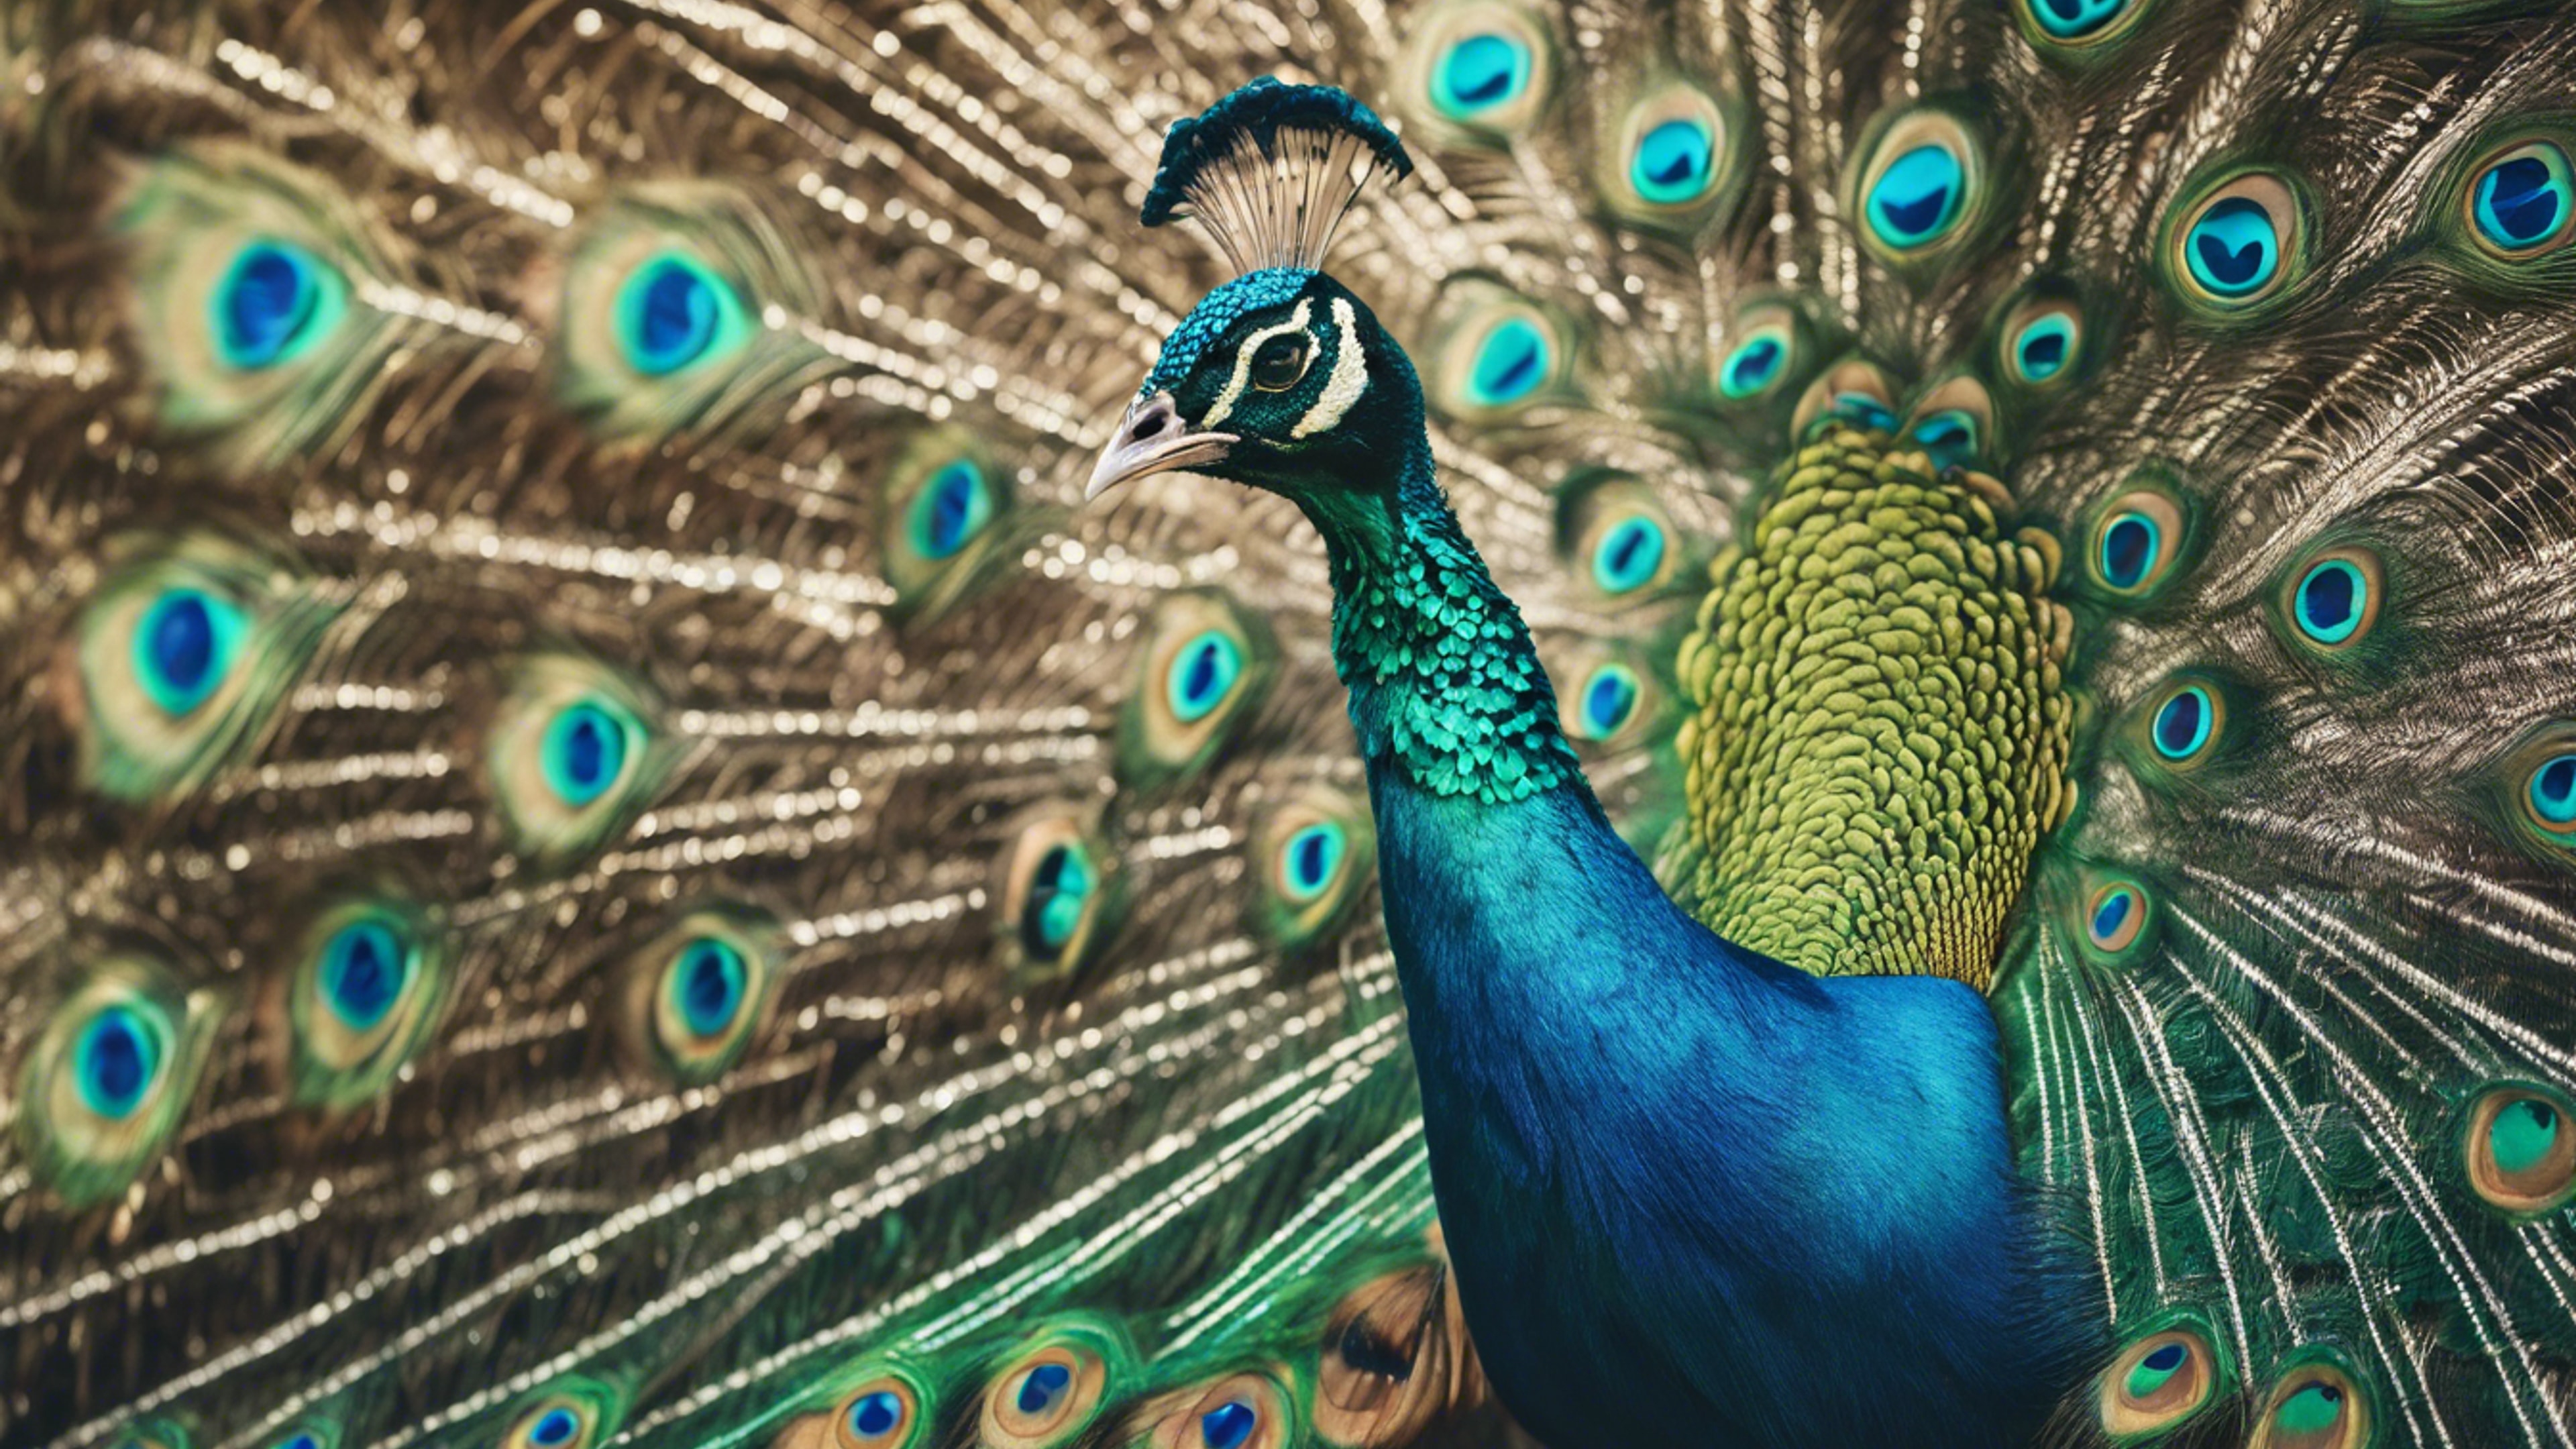 A proudly standing peacock showing off its cool teal plumage. Валлпапер[c03cd8acf17648f0a47e]